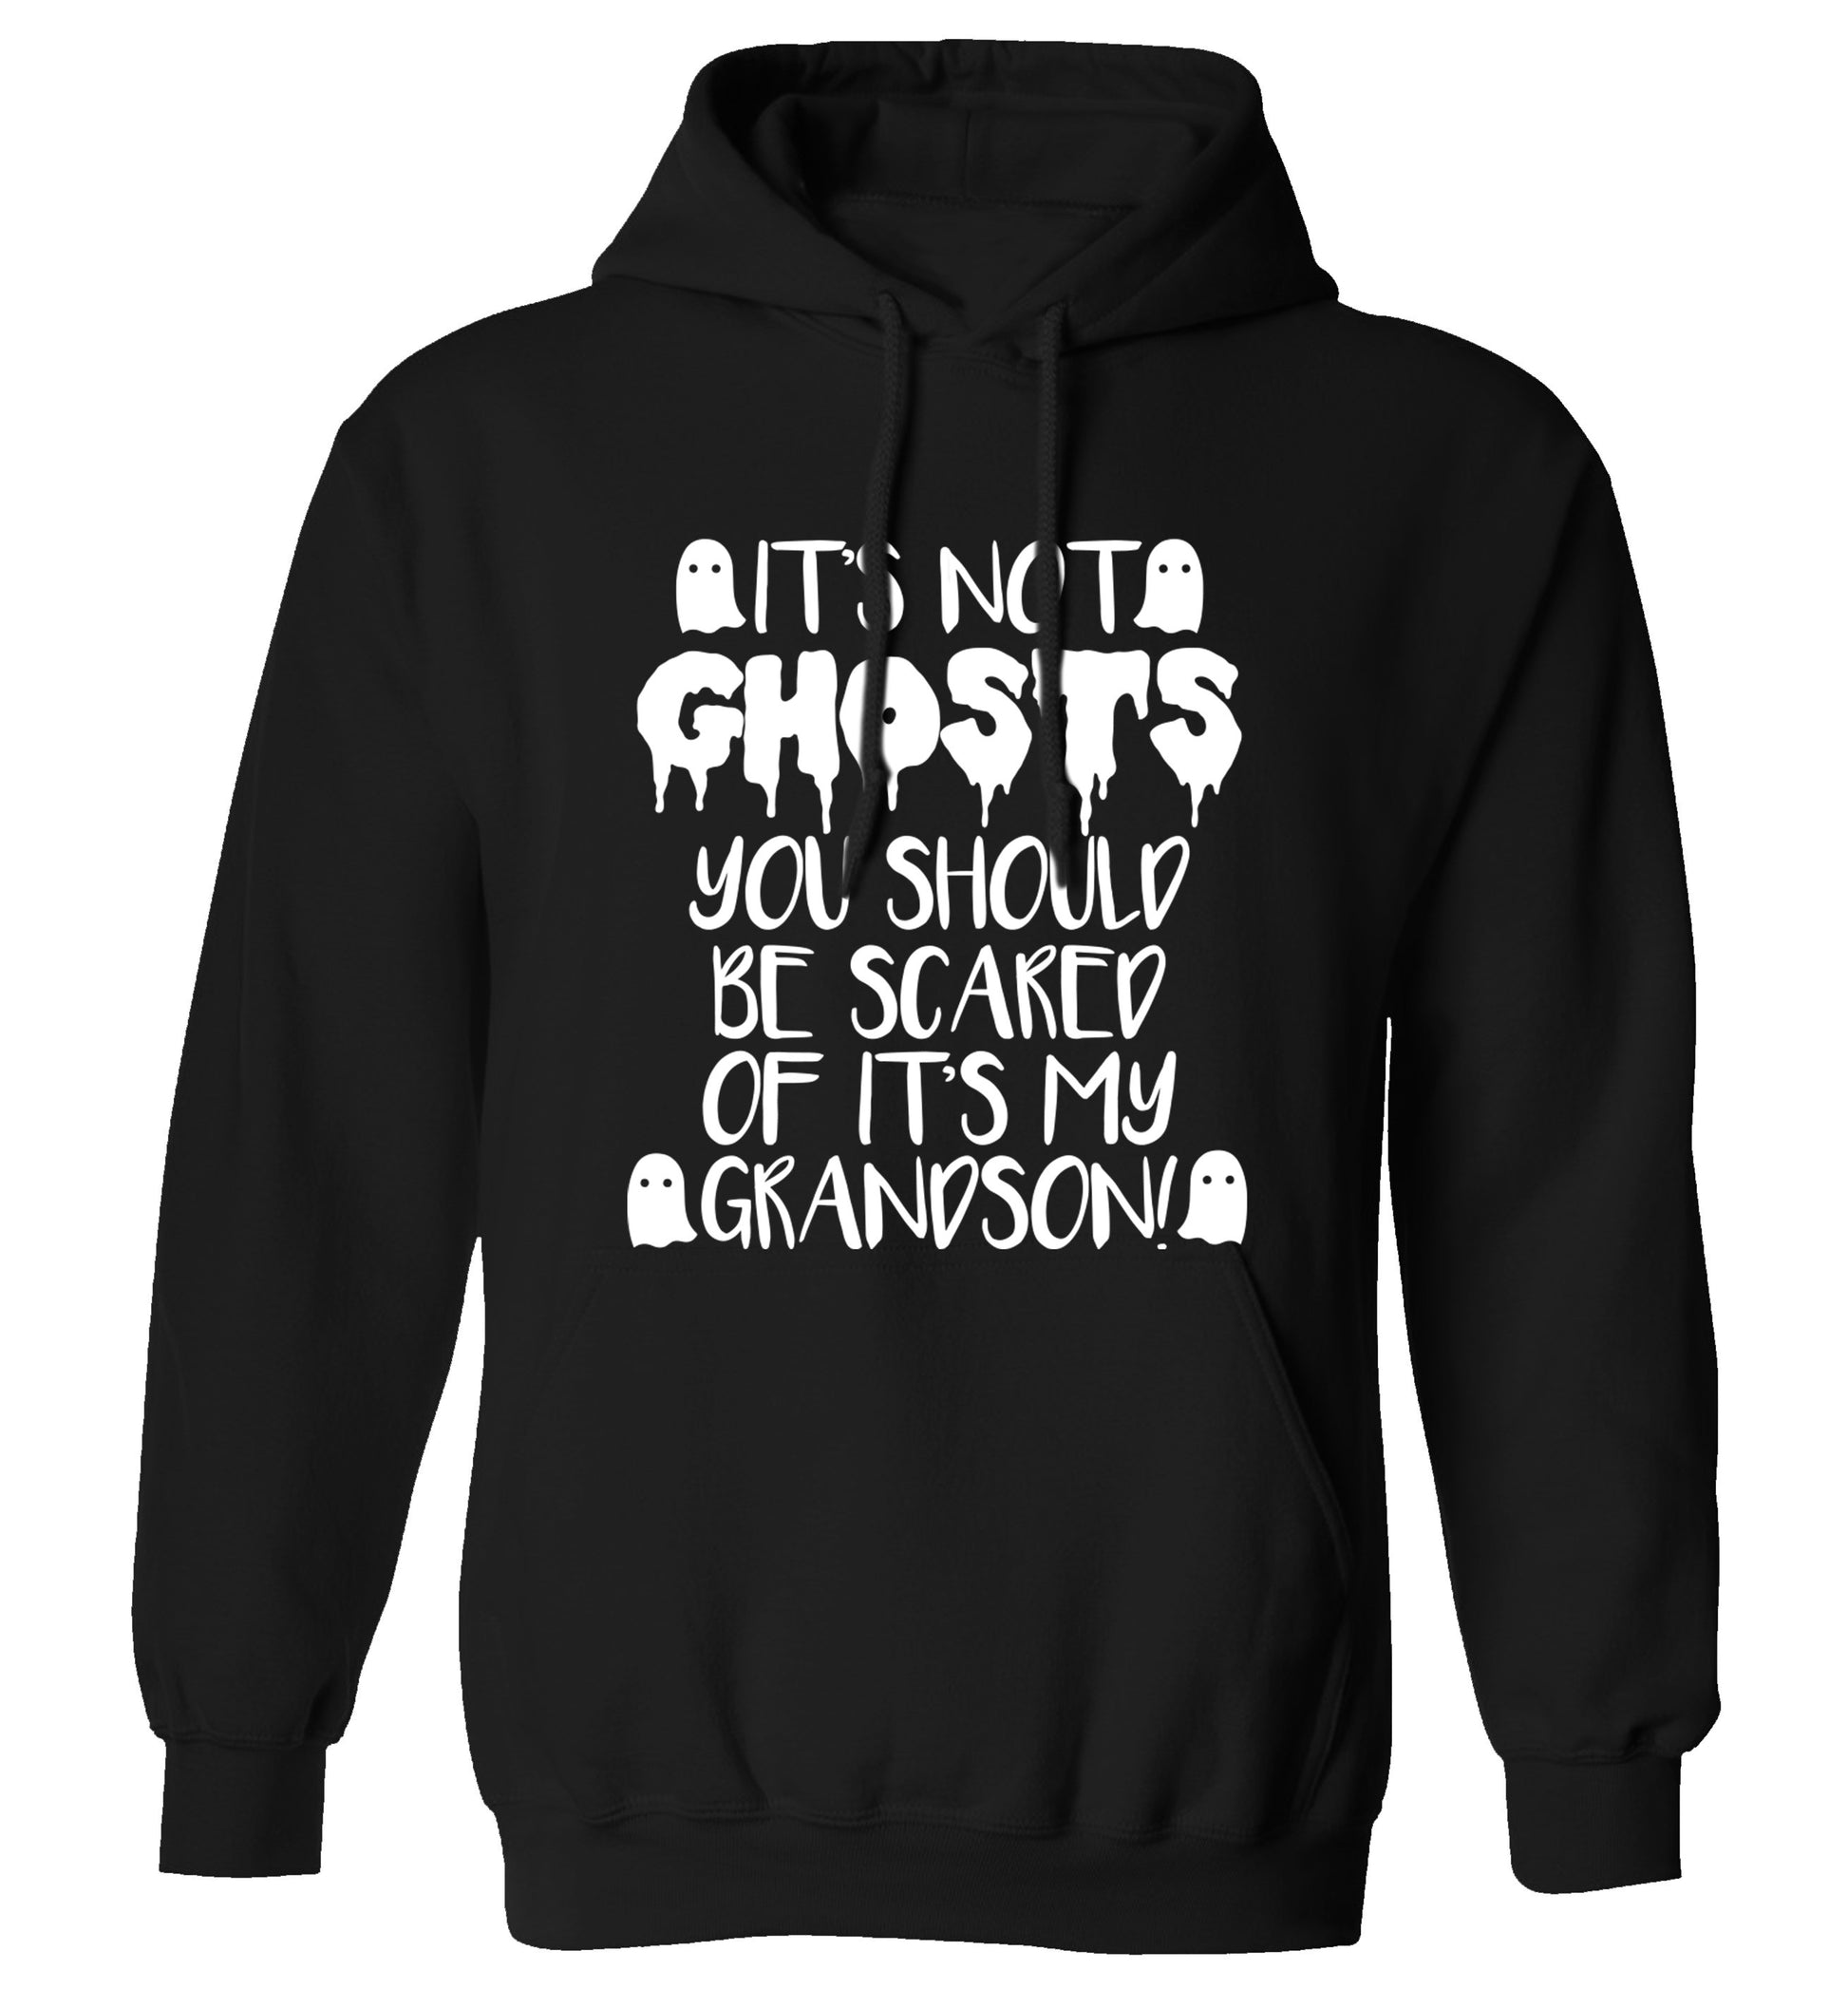 It's not ghosts you should be scared of it's my grandson! adults unisex black hoodie 2XL